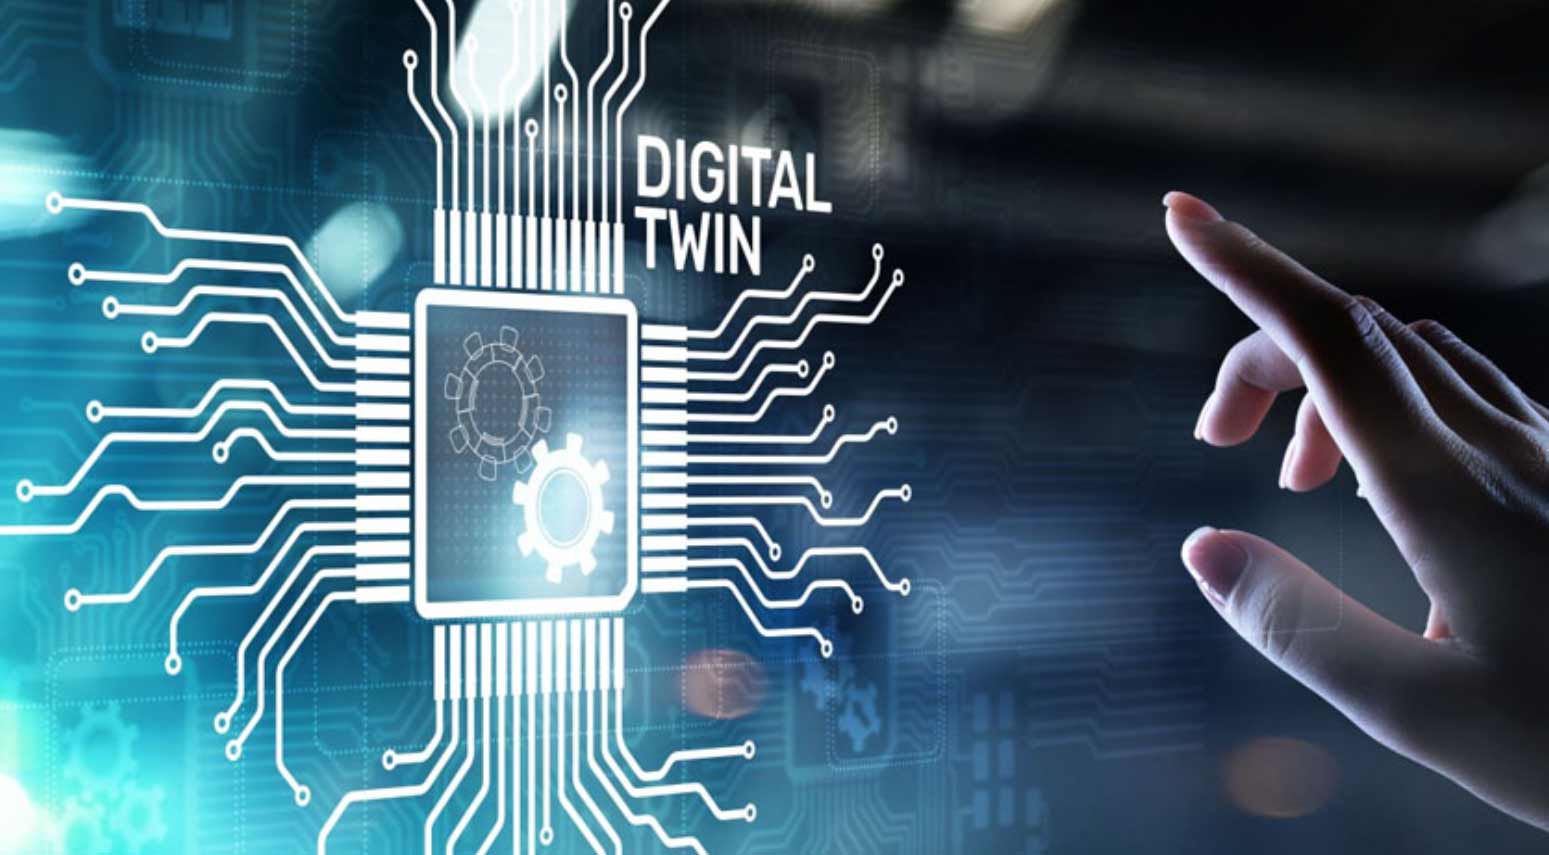 DoT launches digital twin initiative for building 'Smart Infrastructure'